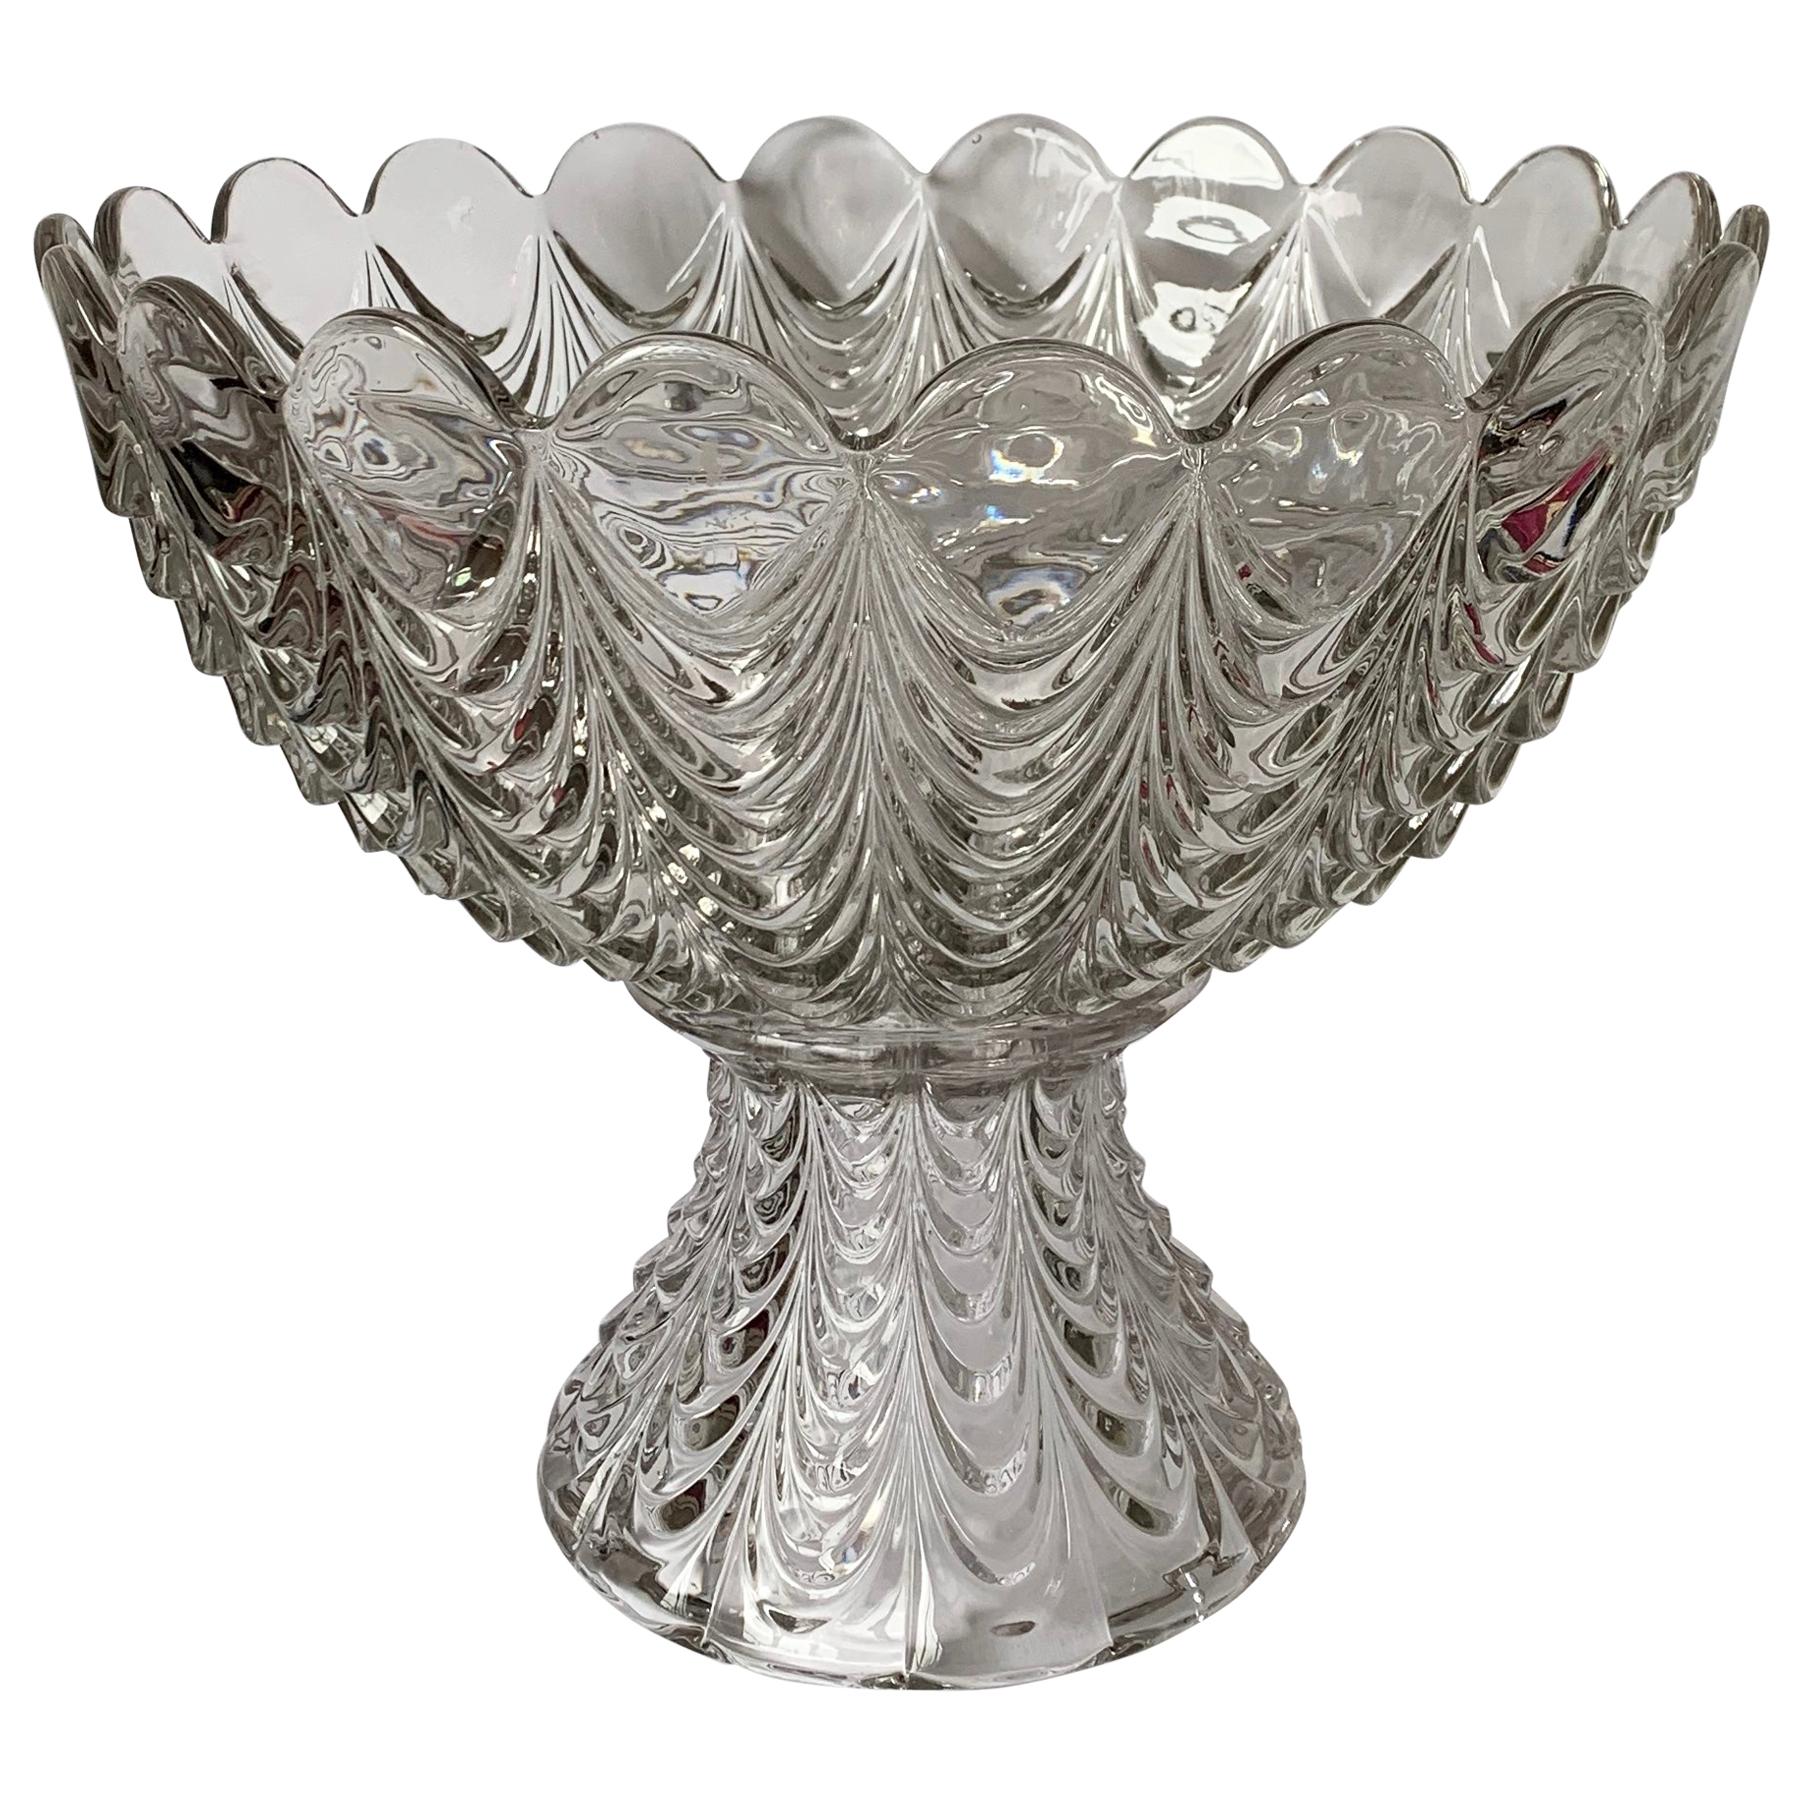 American Pressed Glass Peacock Pattern Punchbowl on Stand